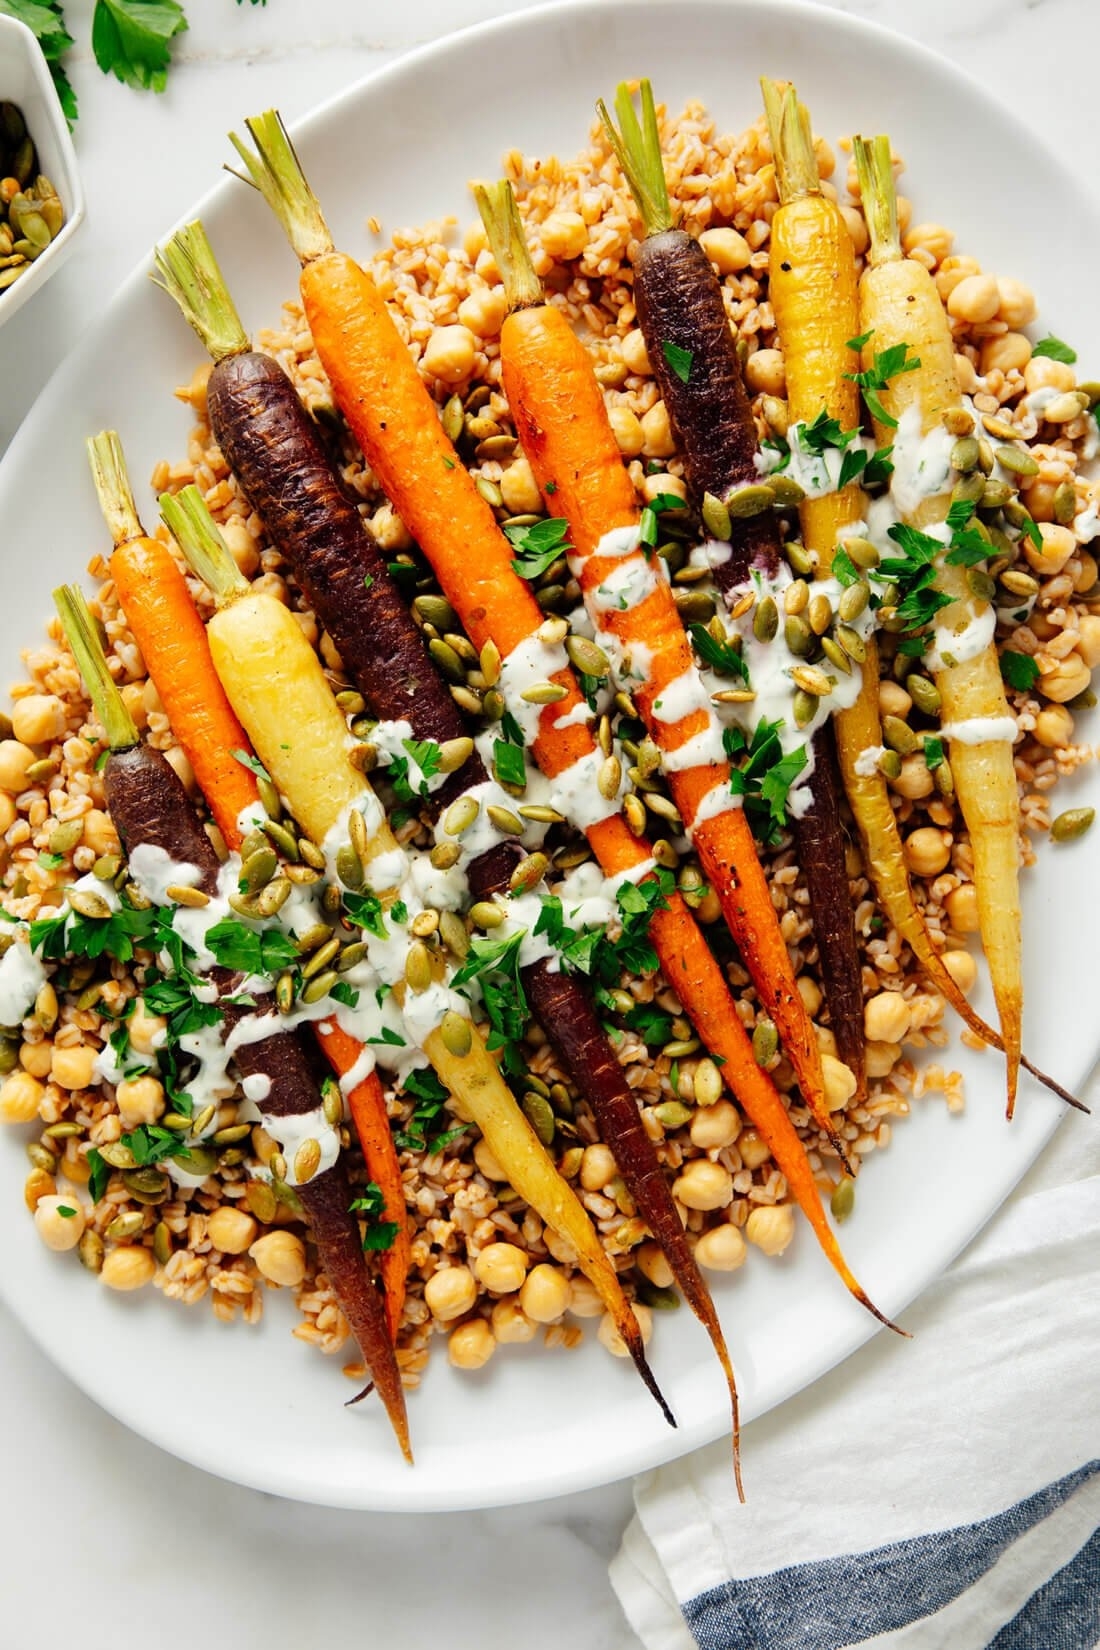 roasted rainbow carrots on a bed of farro and chickpeas